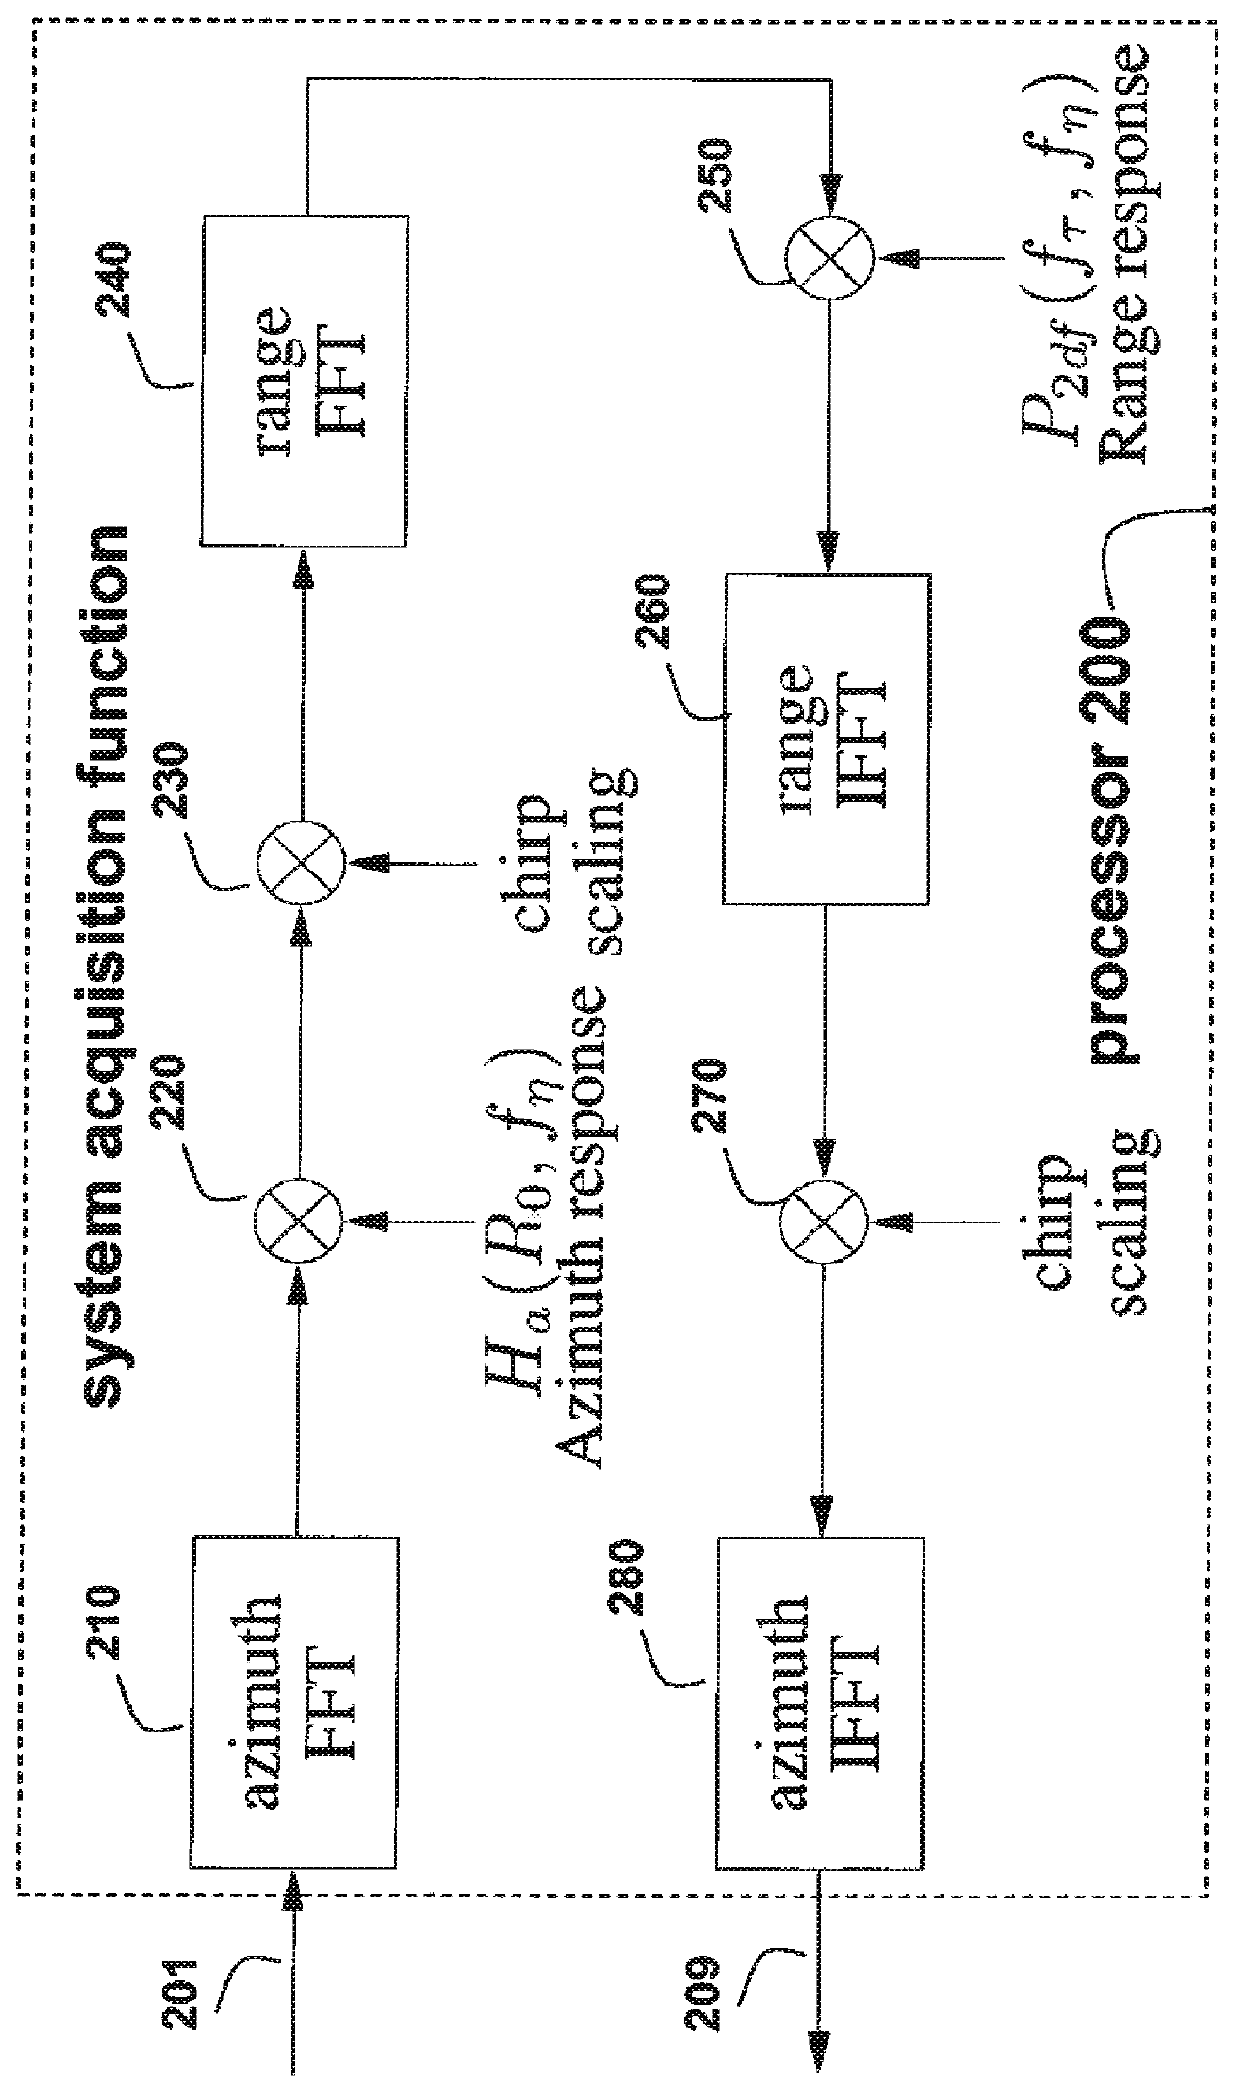 Synthetic Aperture Radar Image Formation System and Method